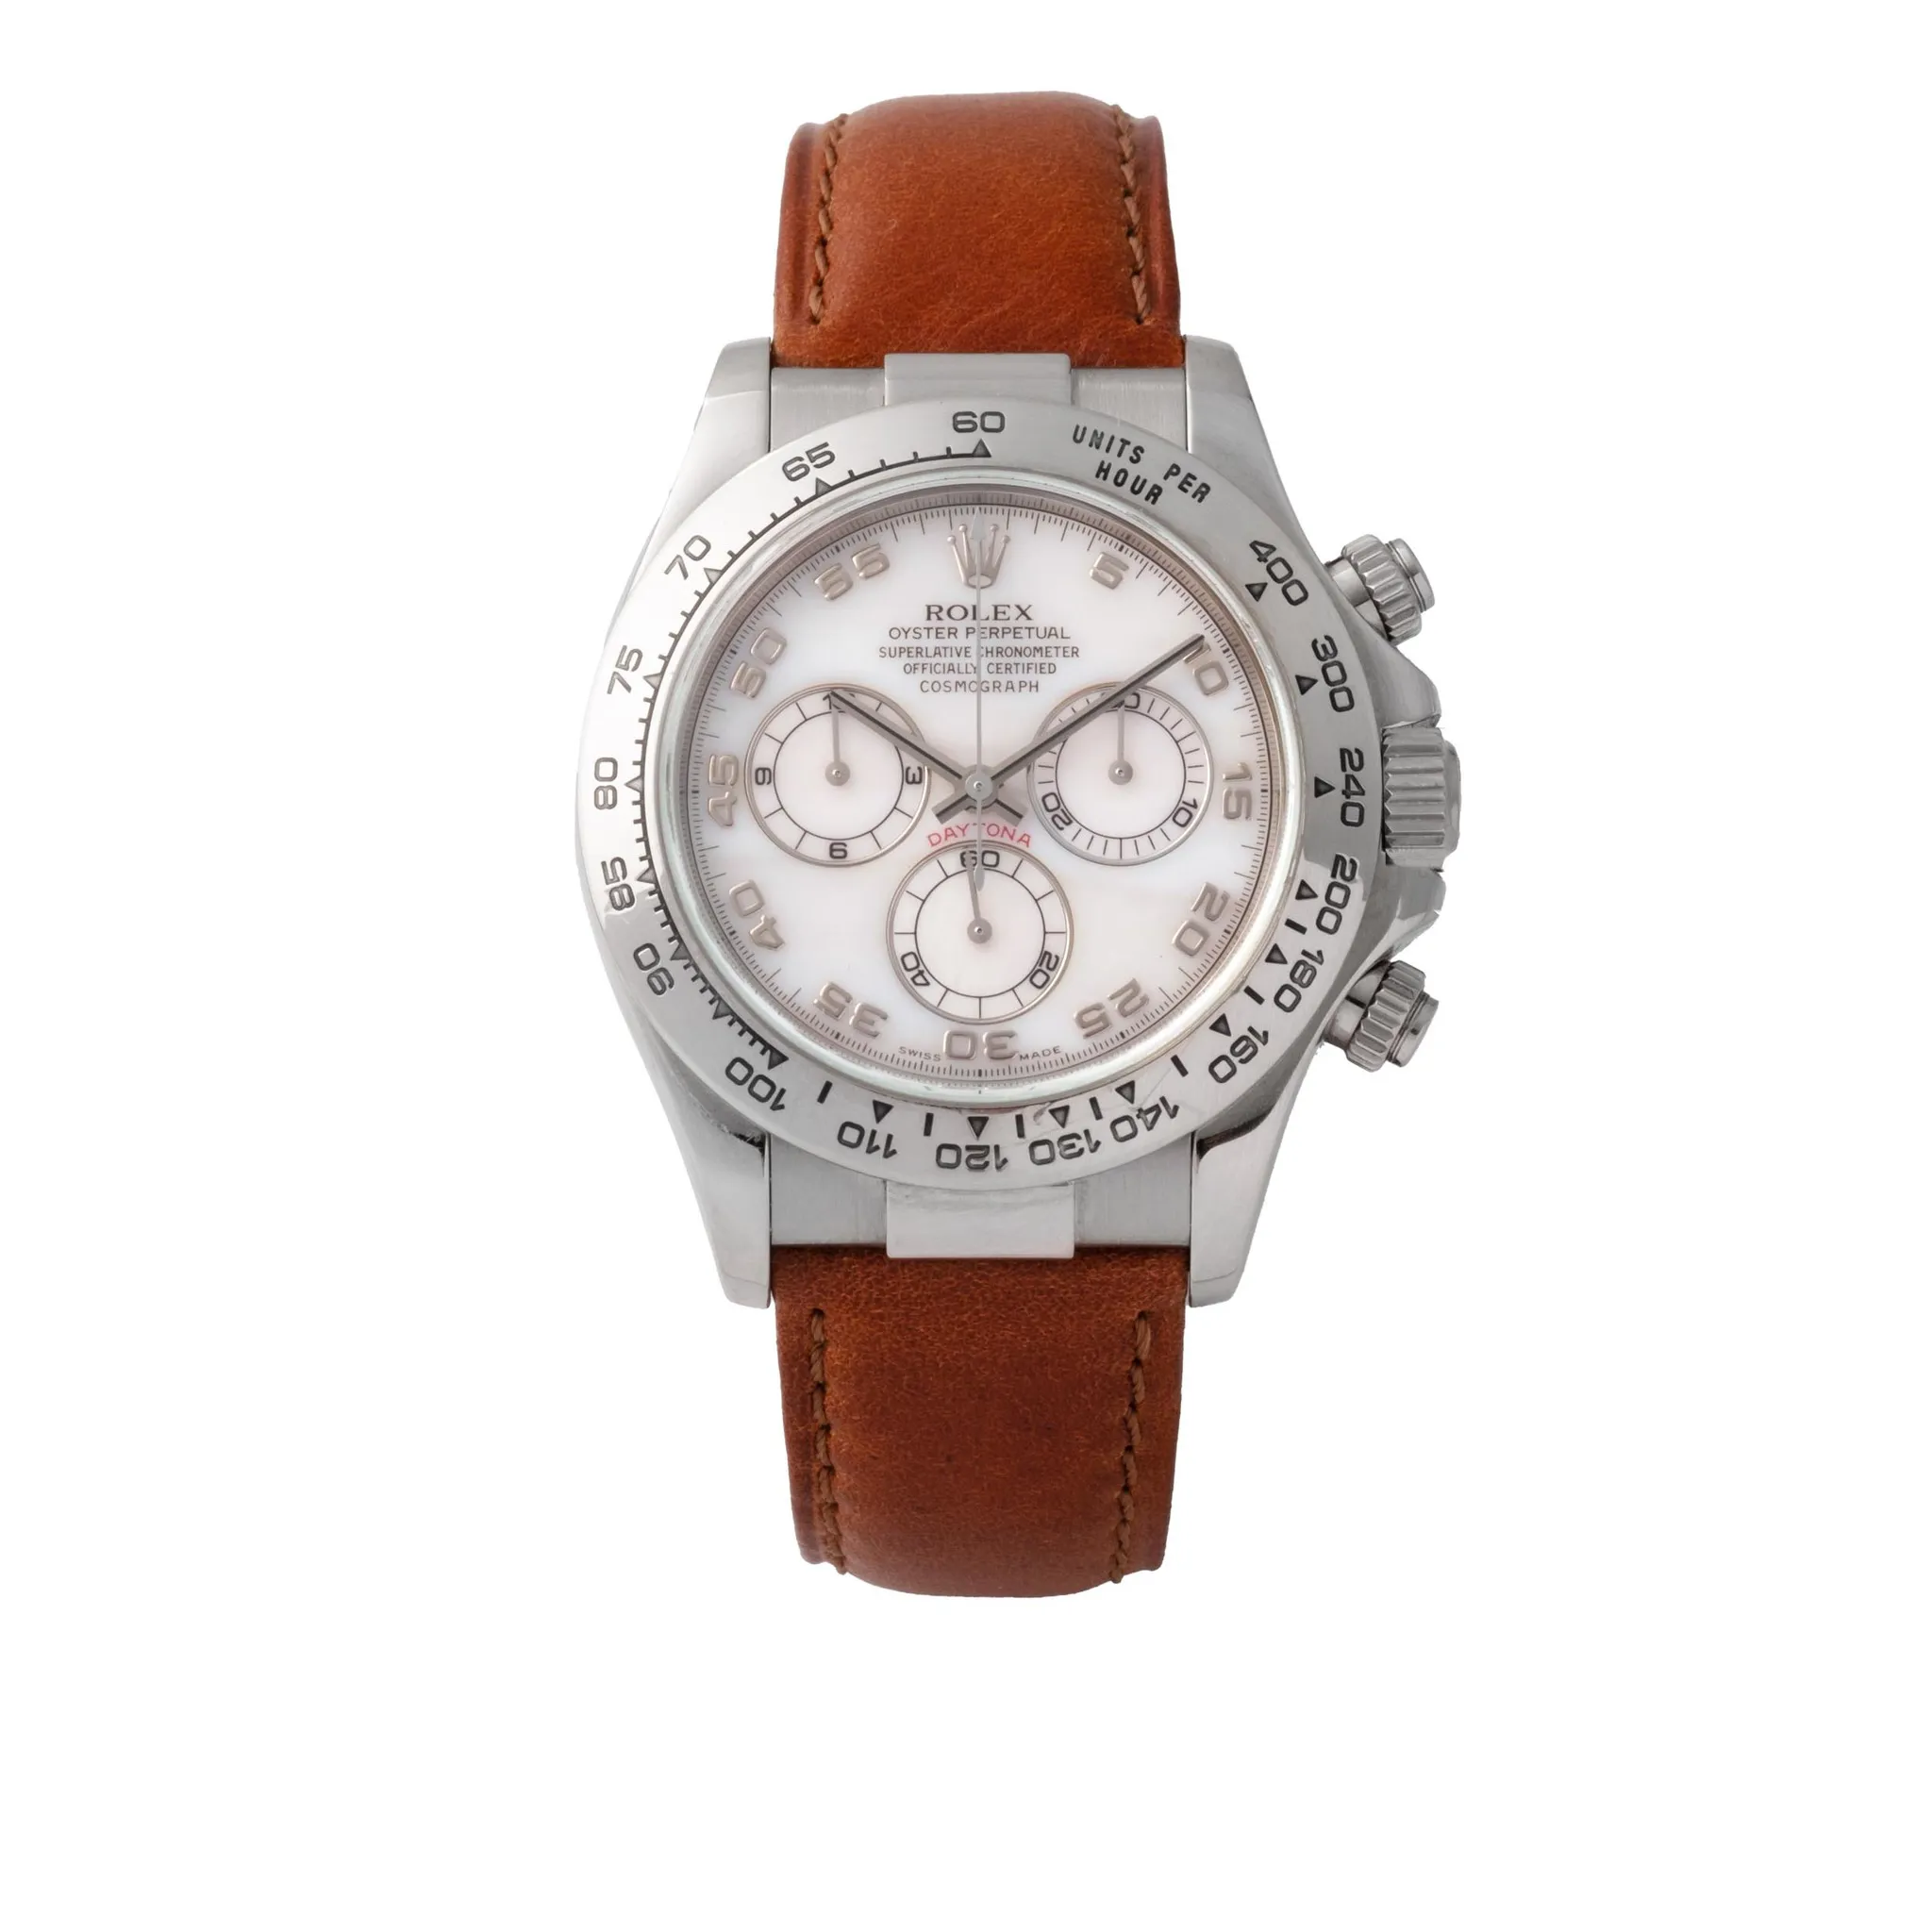 Rolex Daytona 116519 40mm White gold Mother-of-pearl